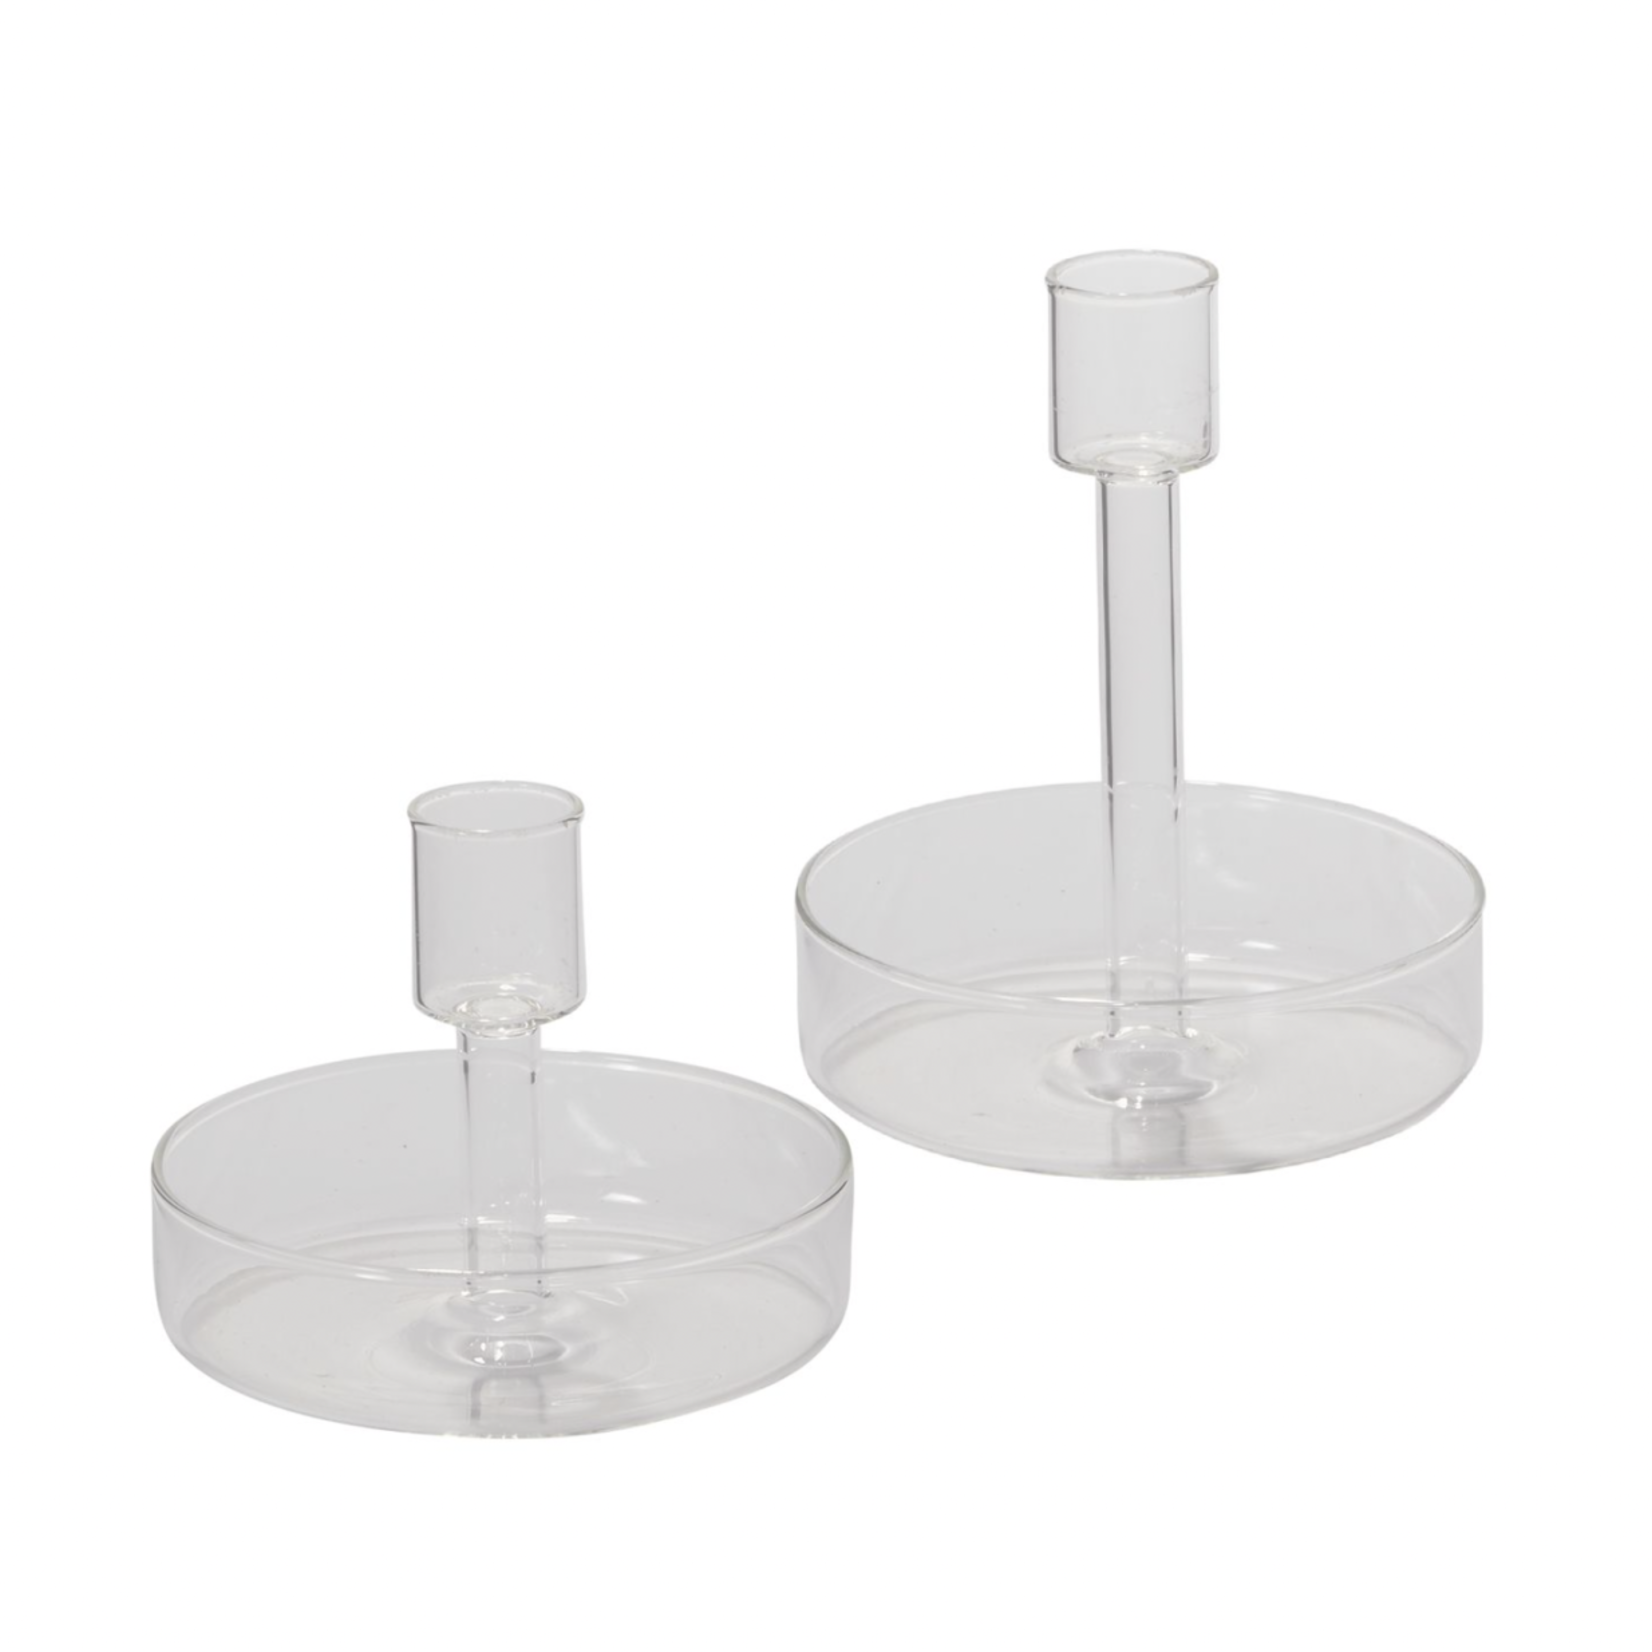 5”H X 4.25” GLASS ADELINE CANDLEHOLDER (CHIMNEY NOT INCLUDED)